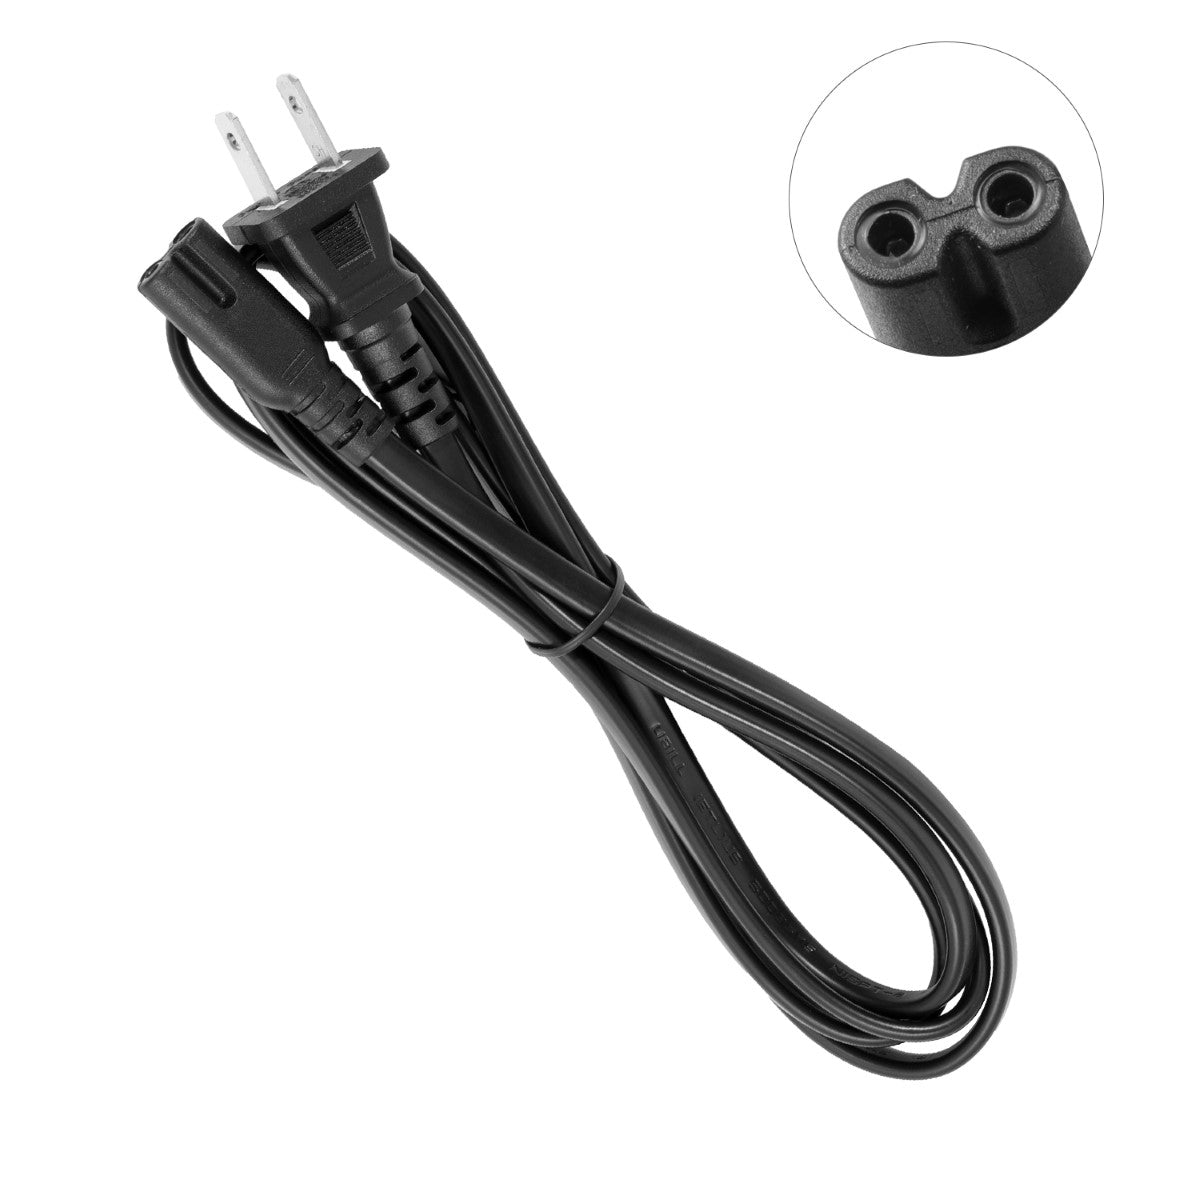 Power Cord for HP Officejet Pro X451dn Printer.